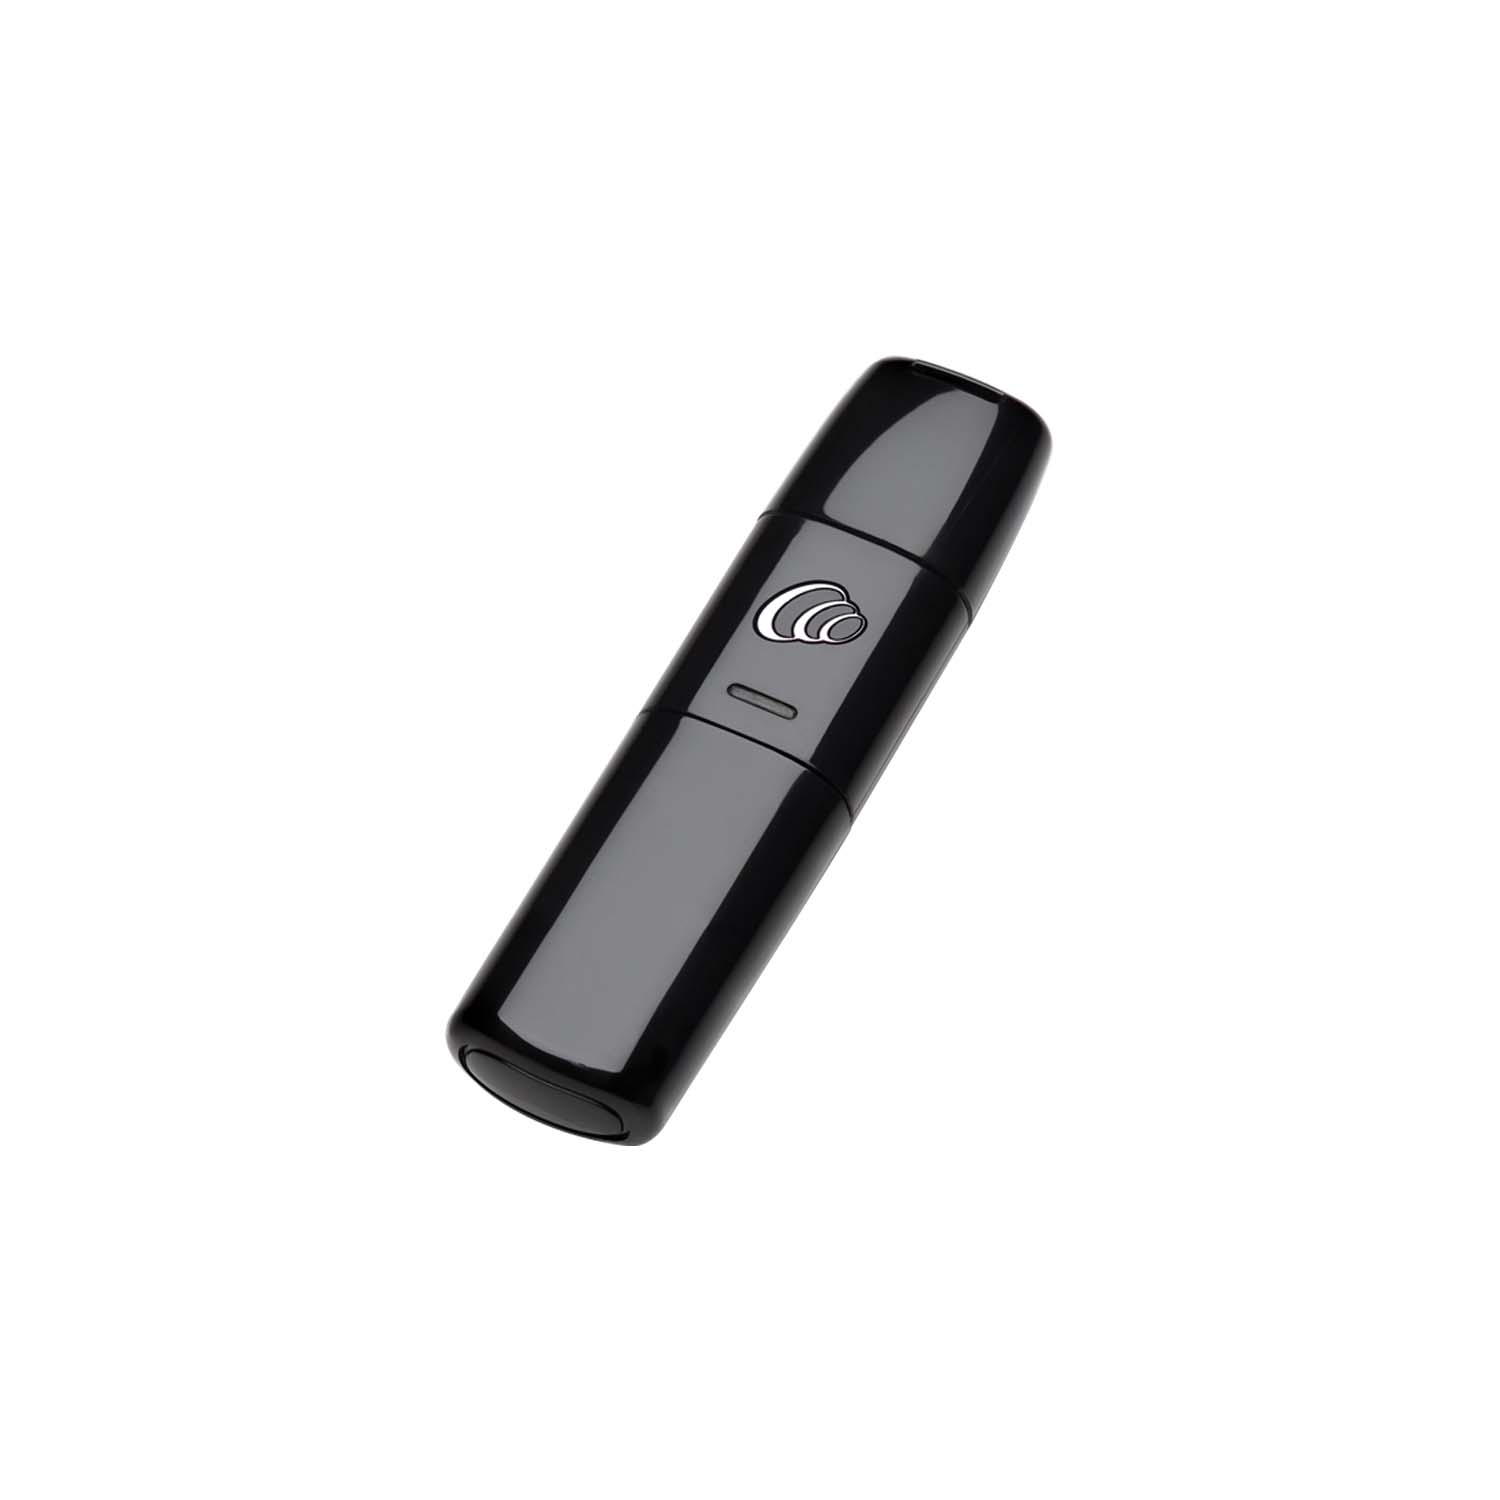 Shop Cochlear USB Battery Charger | Cochlear Americas